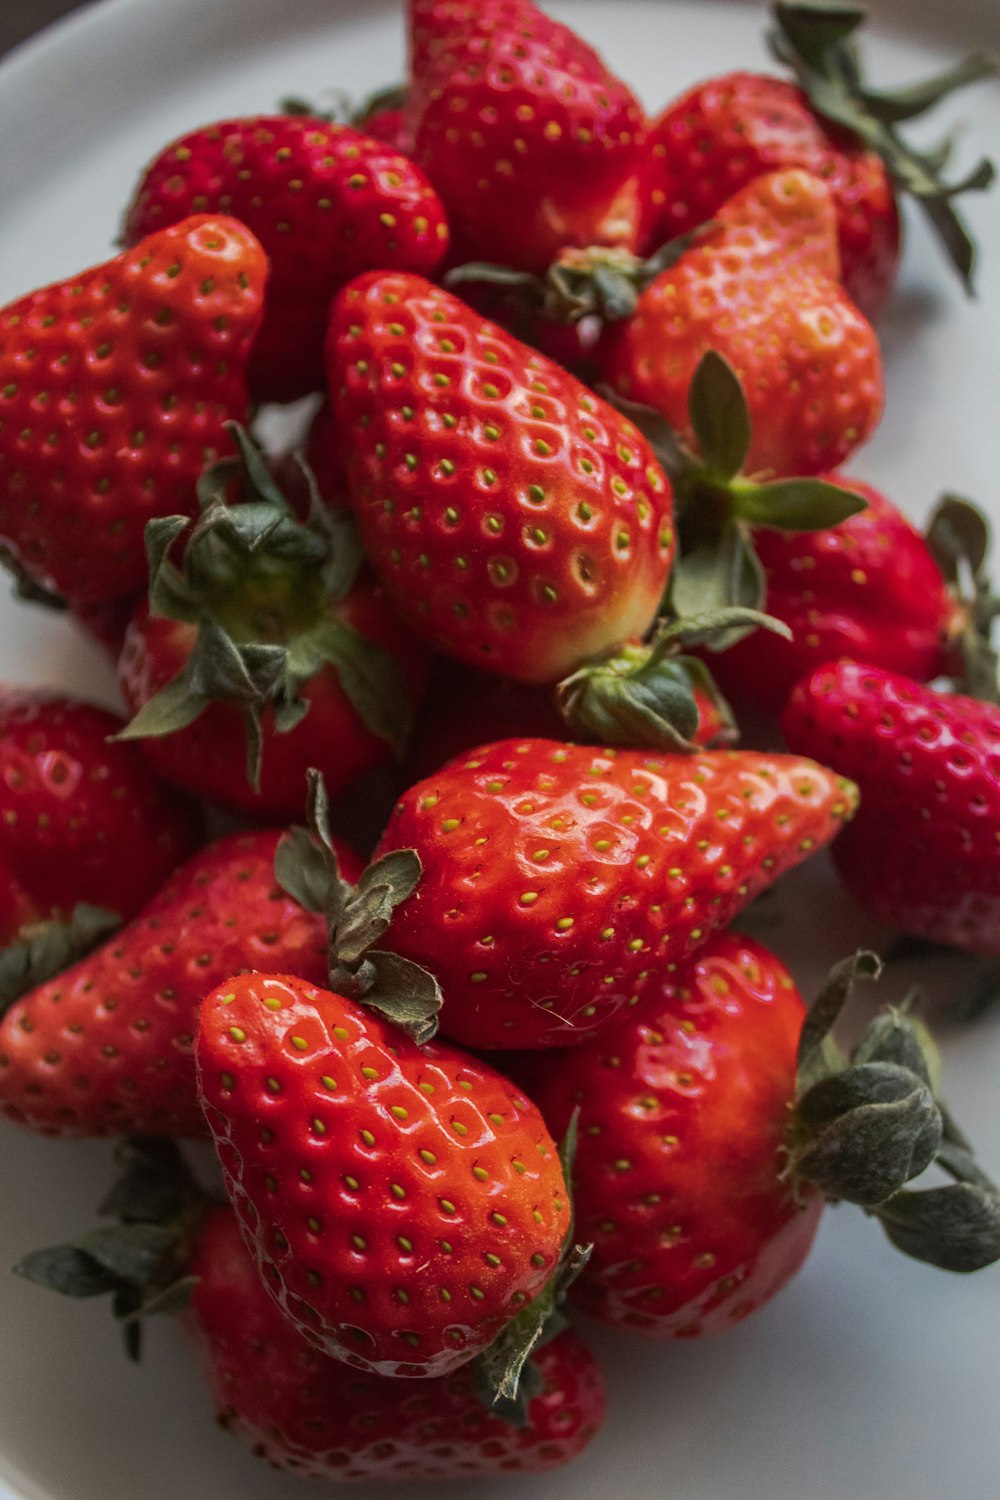 a close up of a plate of strawberries